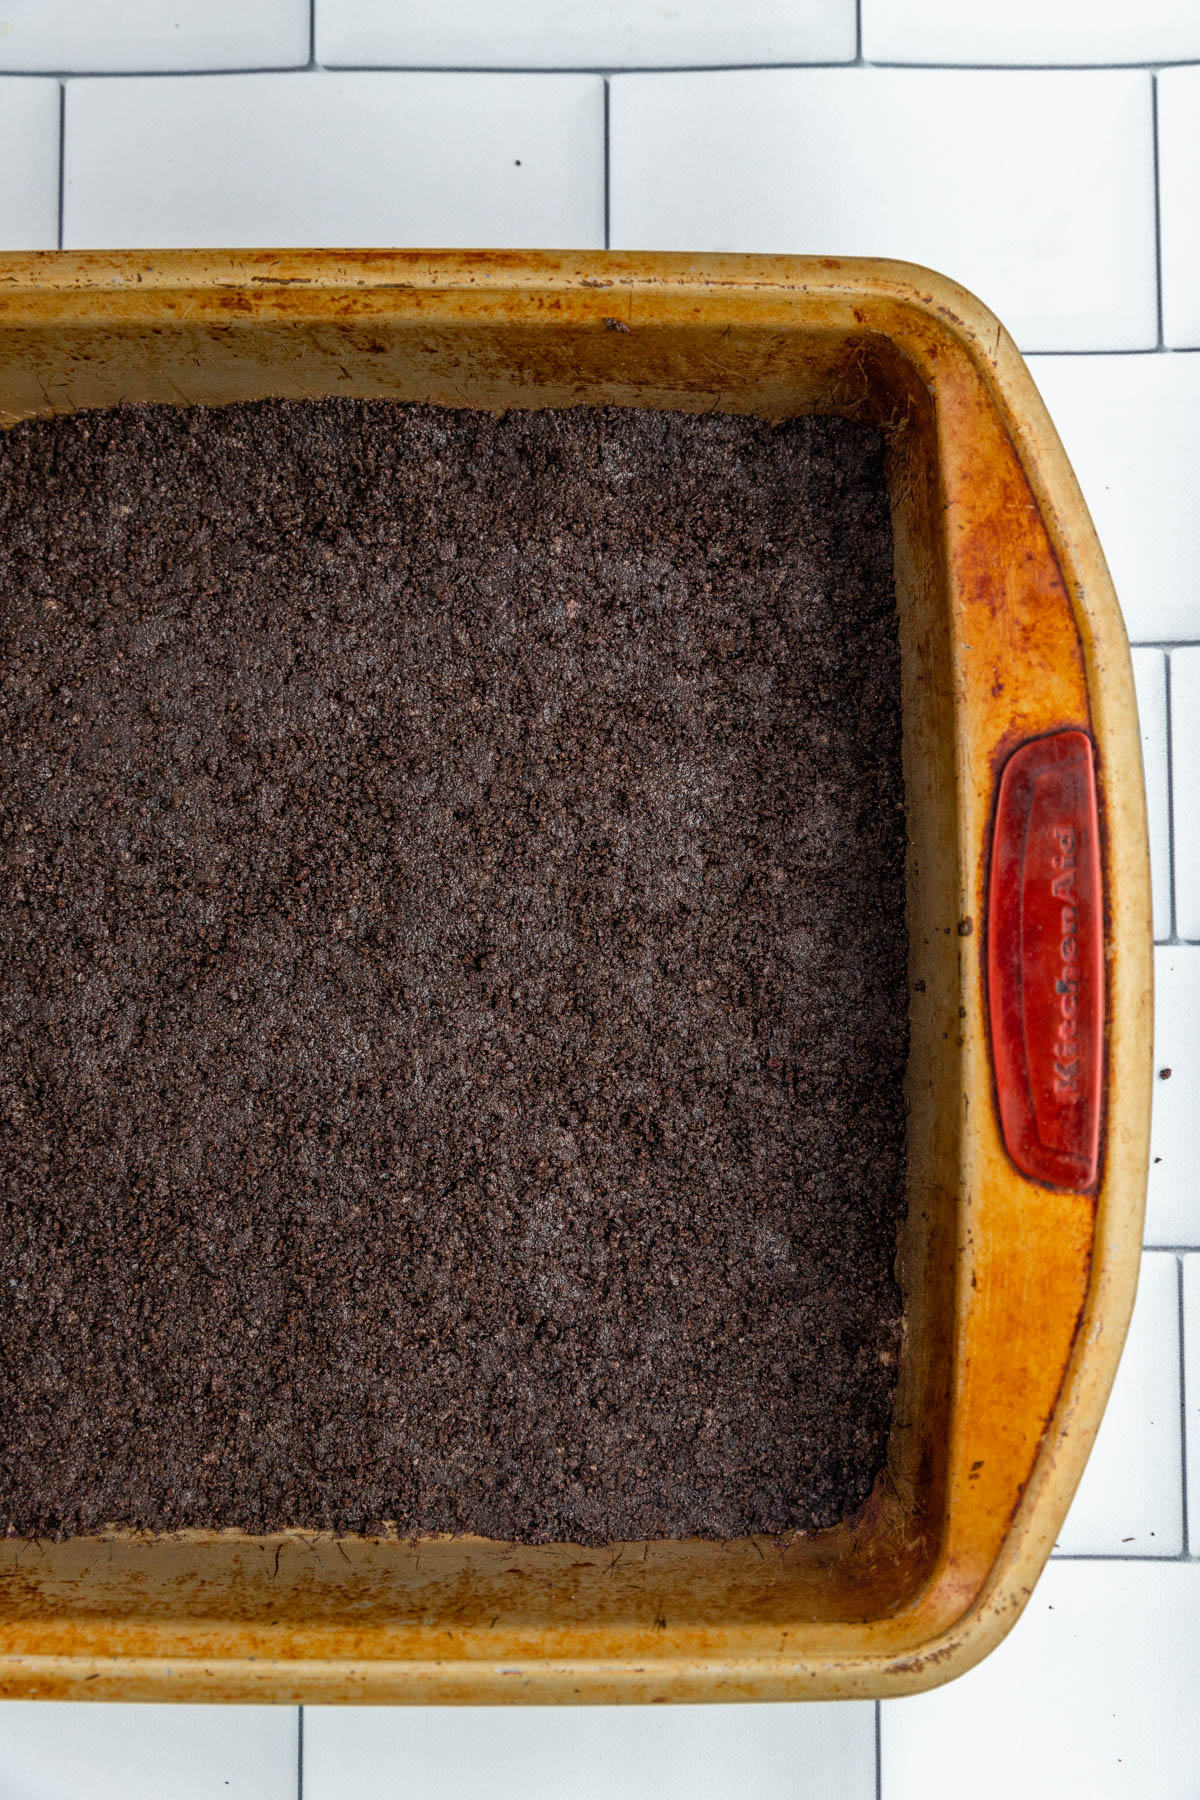 Oreo crust in a square pan.